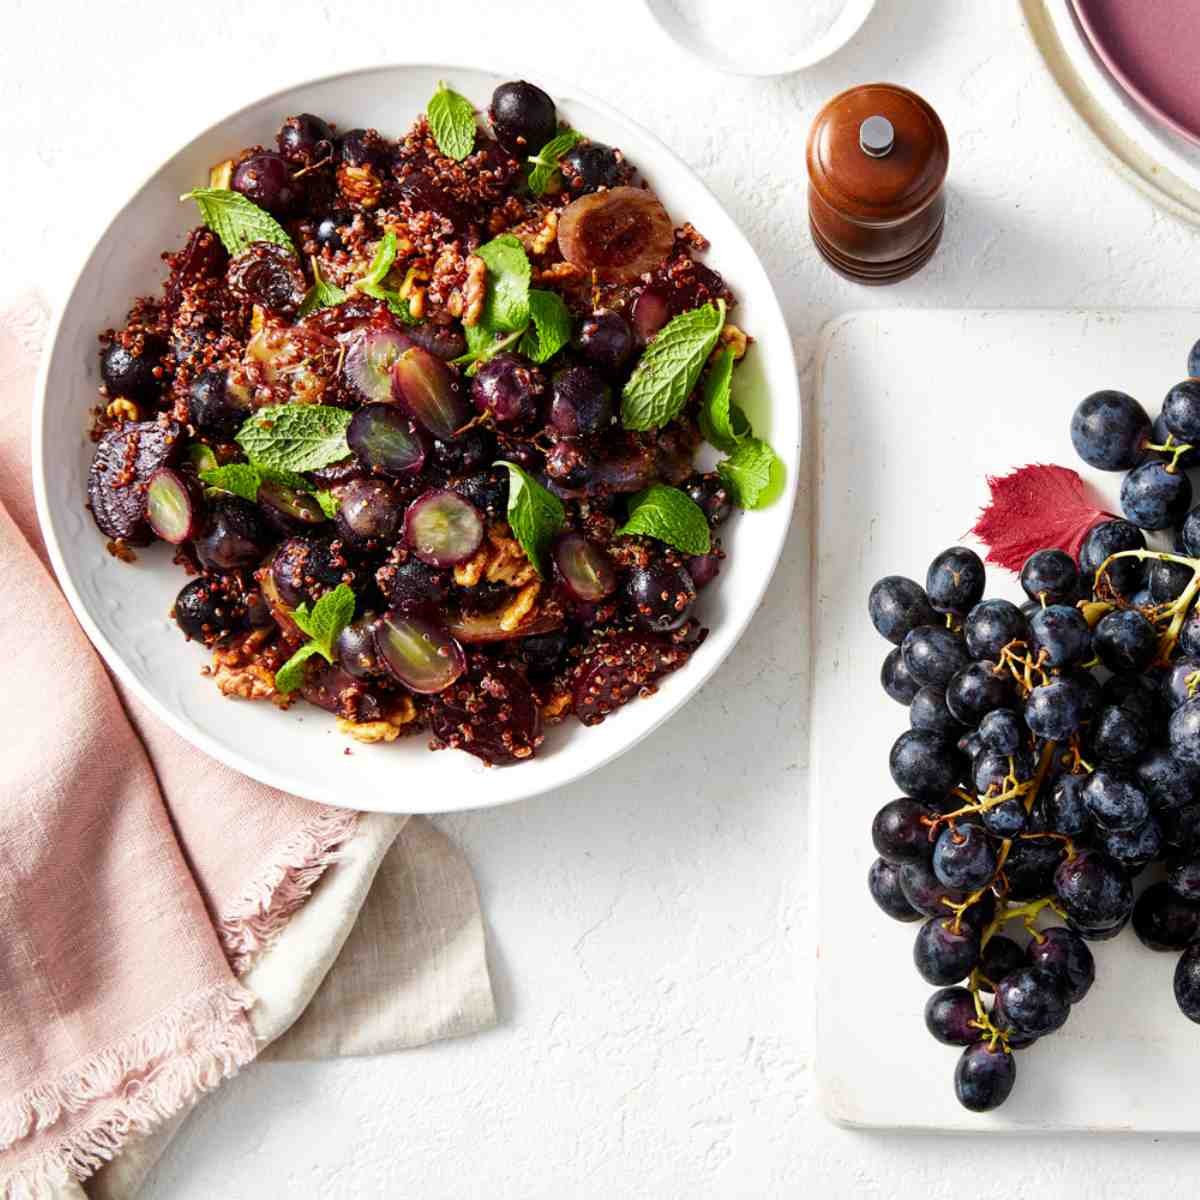 A bowl of grape salad with walnuts, quinoa and mint.